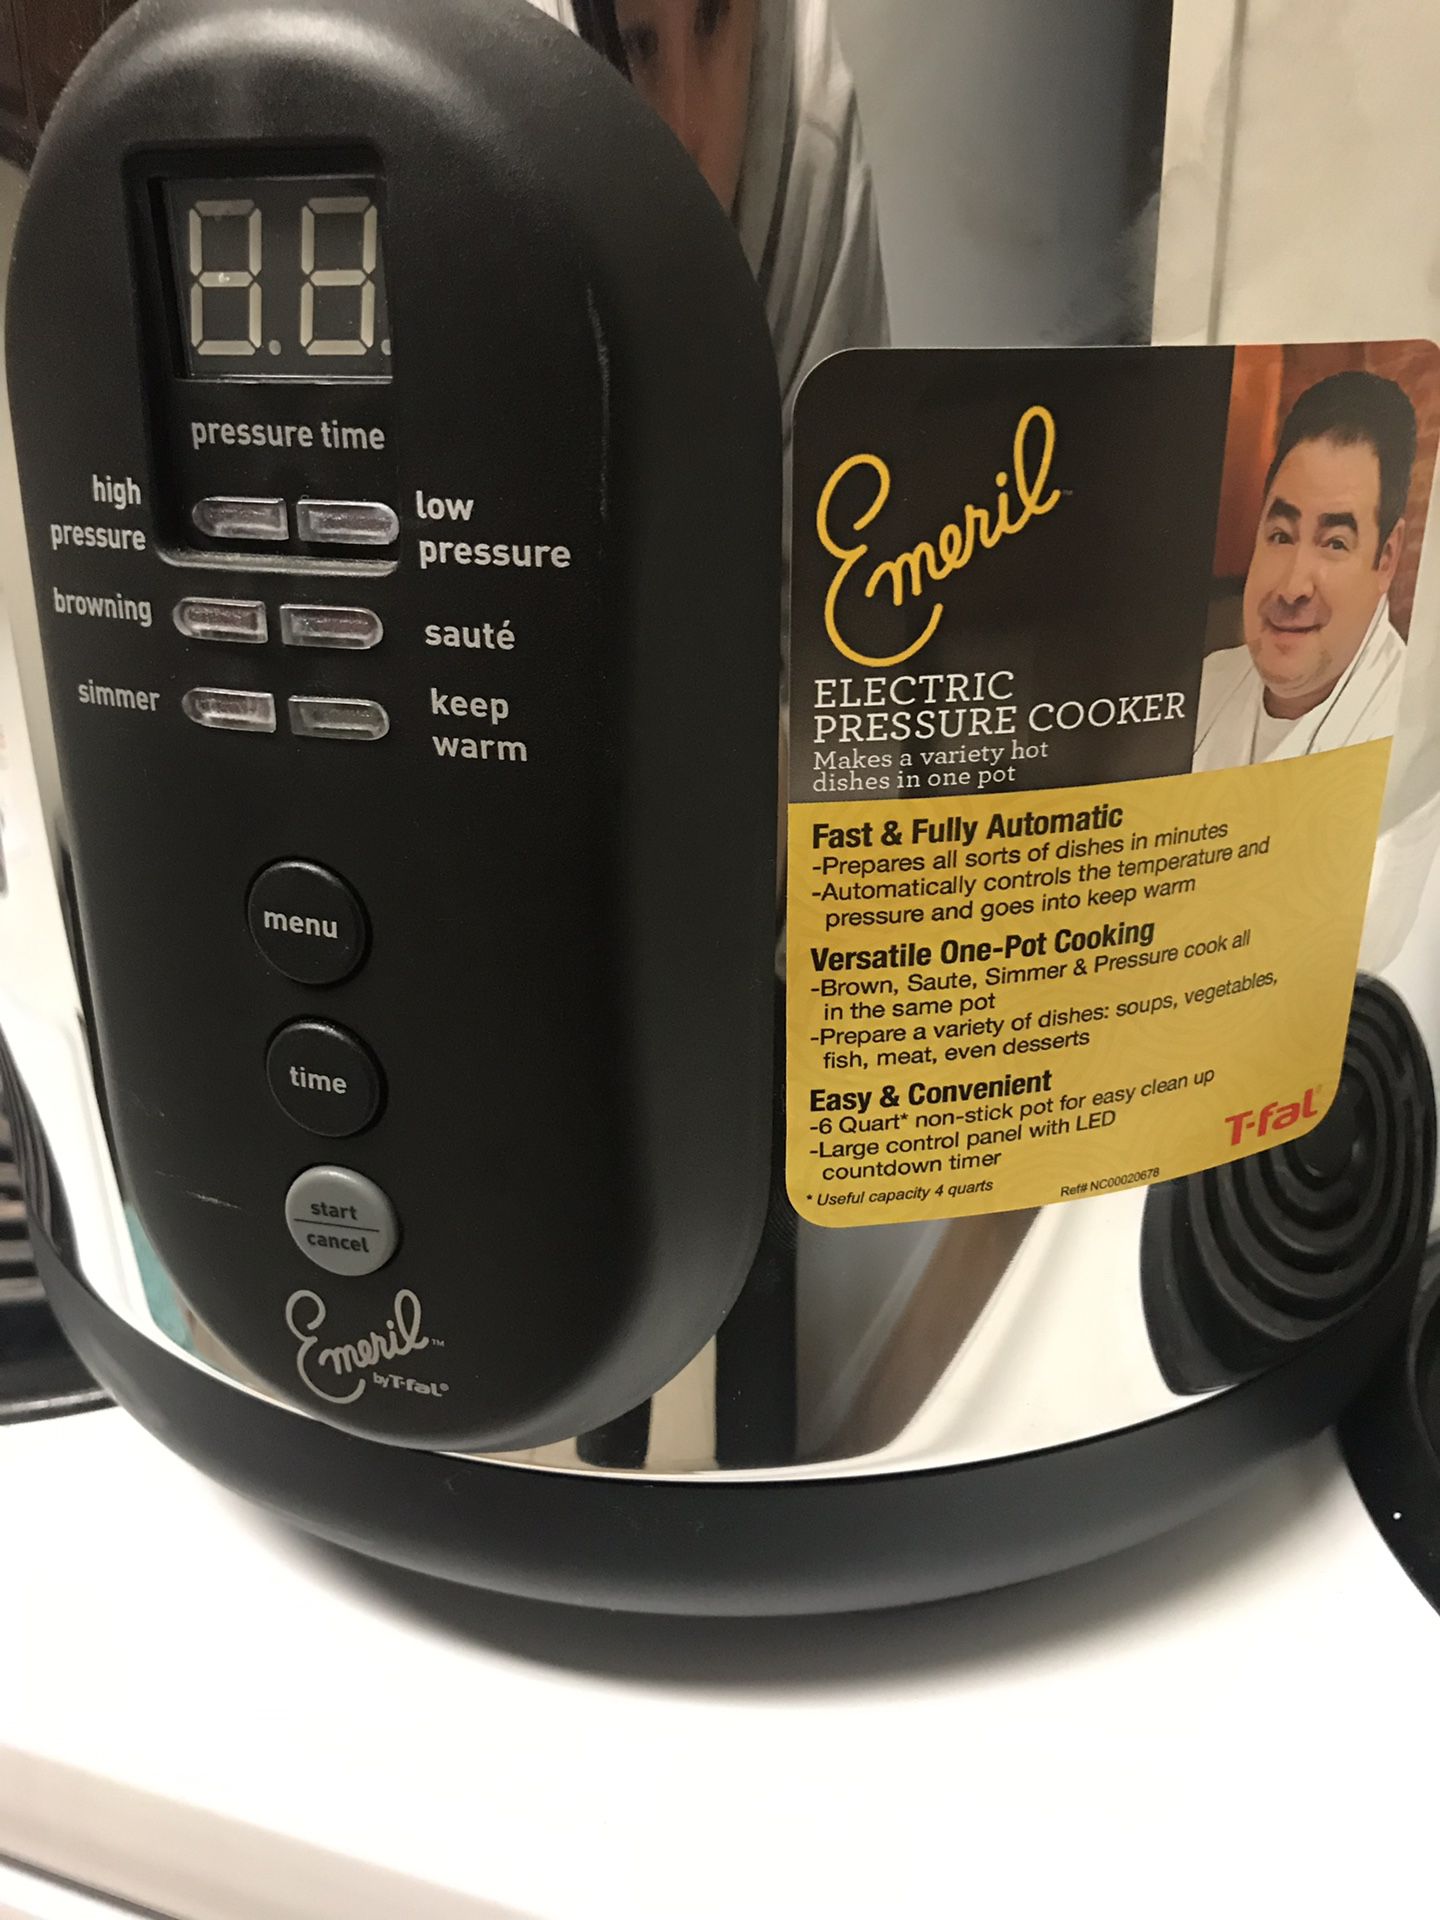 Emeril by T-Fal 6 qt. Digital Stainless Steel Pressure Cooker